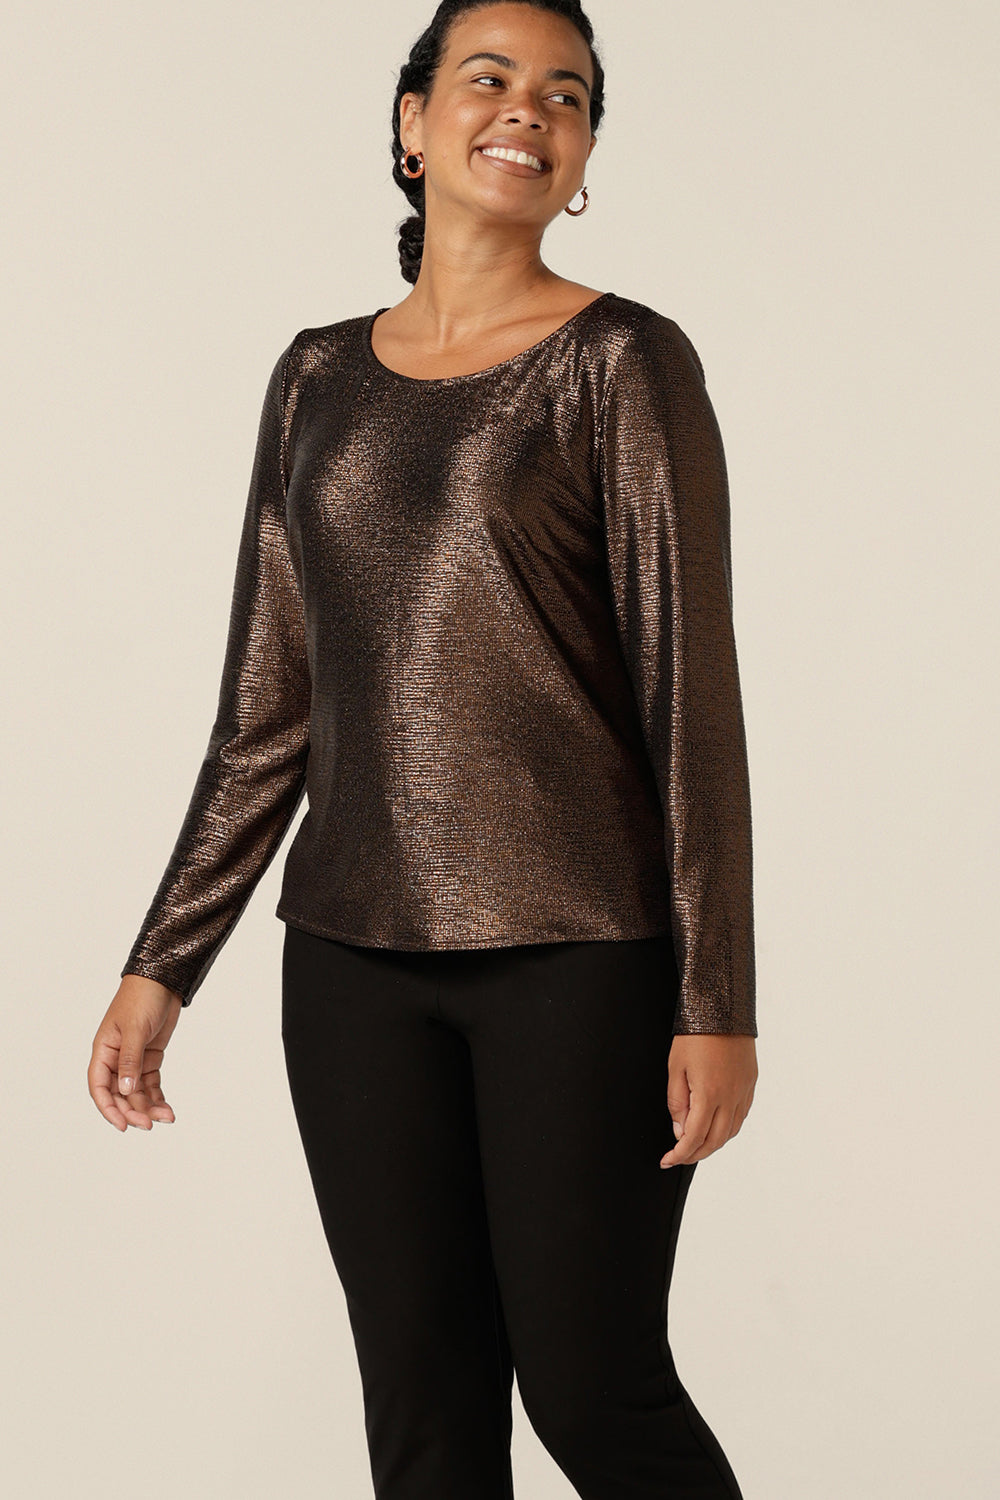  Look good in long sleeved occasionwear with this sparkly top by Australian and New Zealand women's clothing brand, L&F. With a high scoop neckline and long sleeves, this shimmering stretch jersey top is worn with slim leg black evening trousers. A comfortable, modest top for women from petite to plus sizes and great too, for 40 plus women looking for stylish cocktail and event wear.